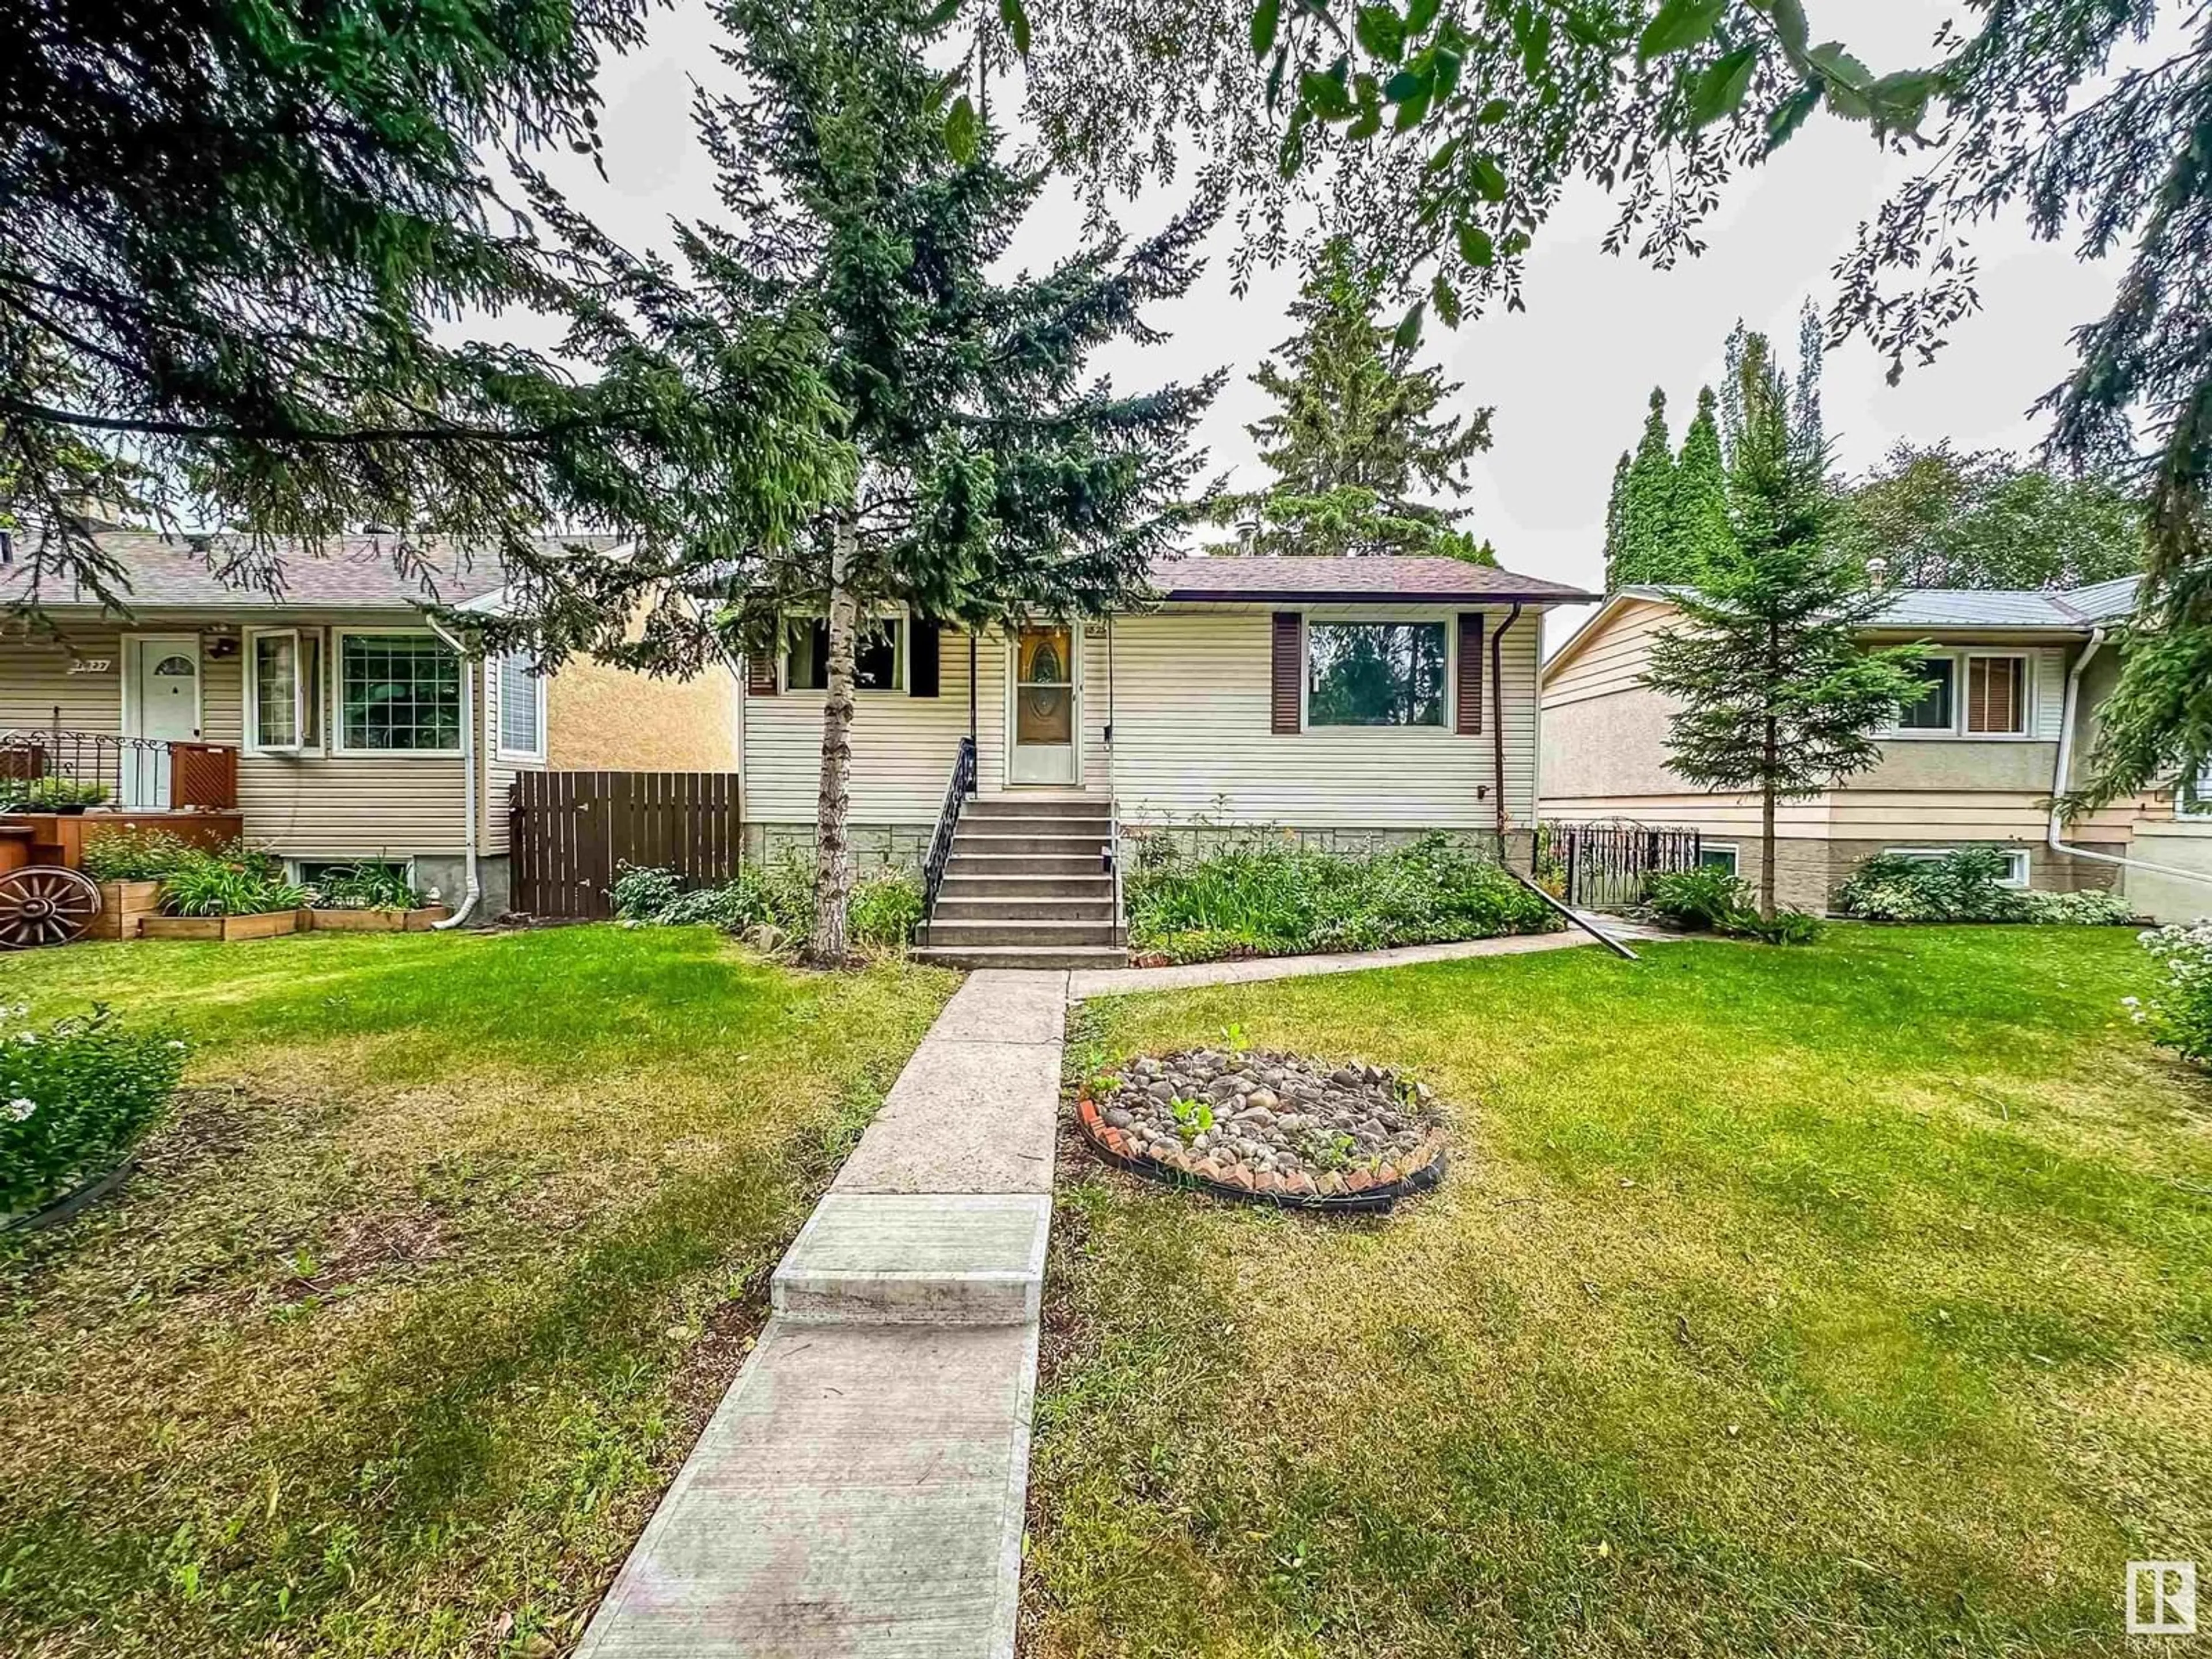 Frontside or backside of a home for 11823 57 ST NW, Edmonton Alberta T5W3V5